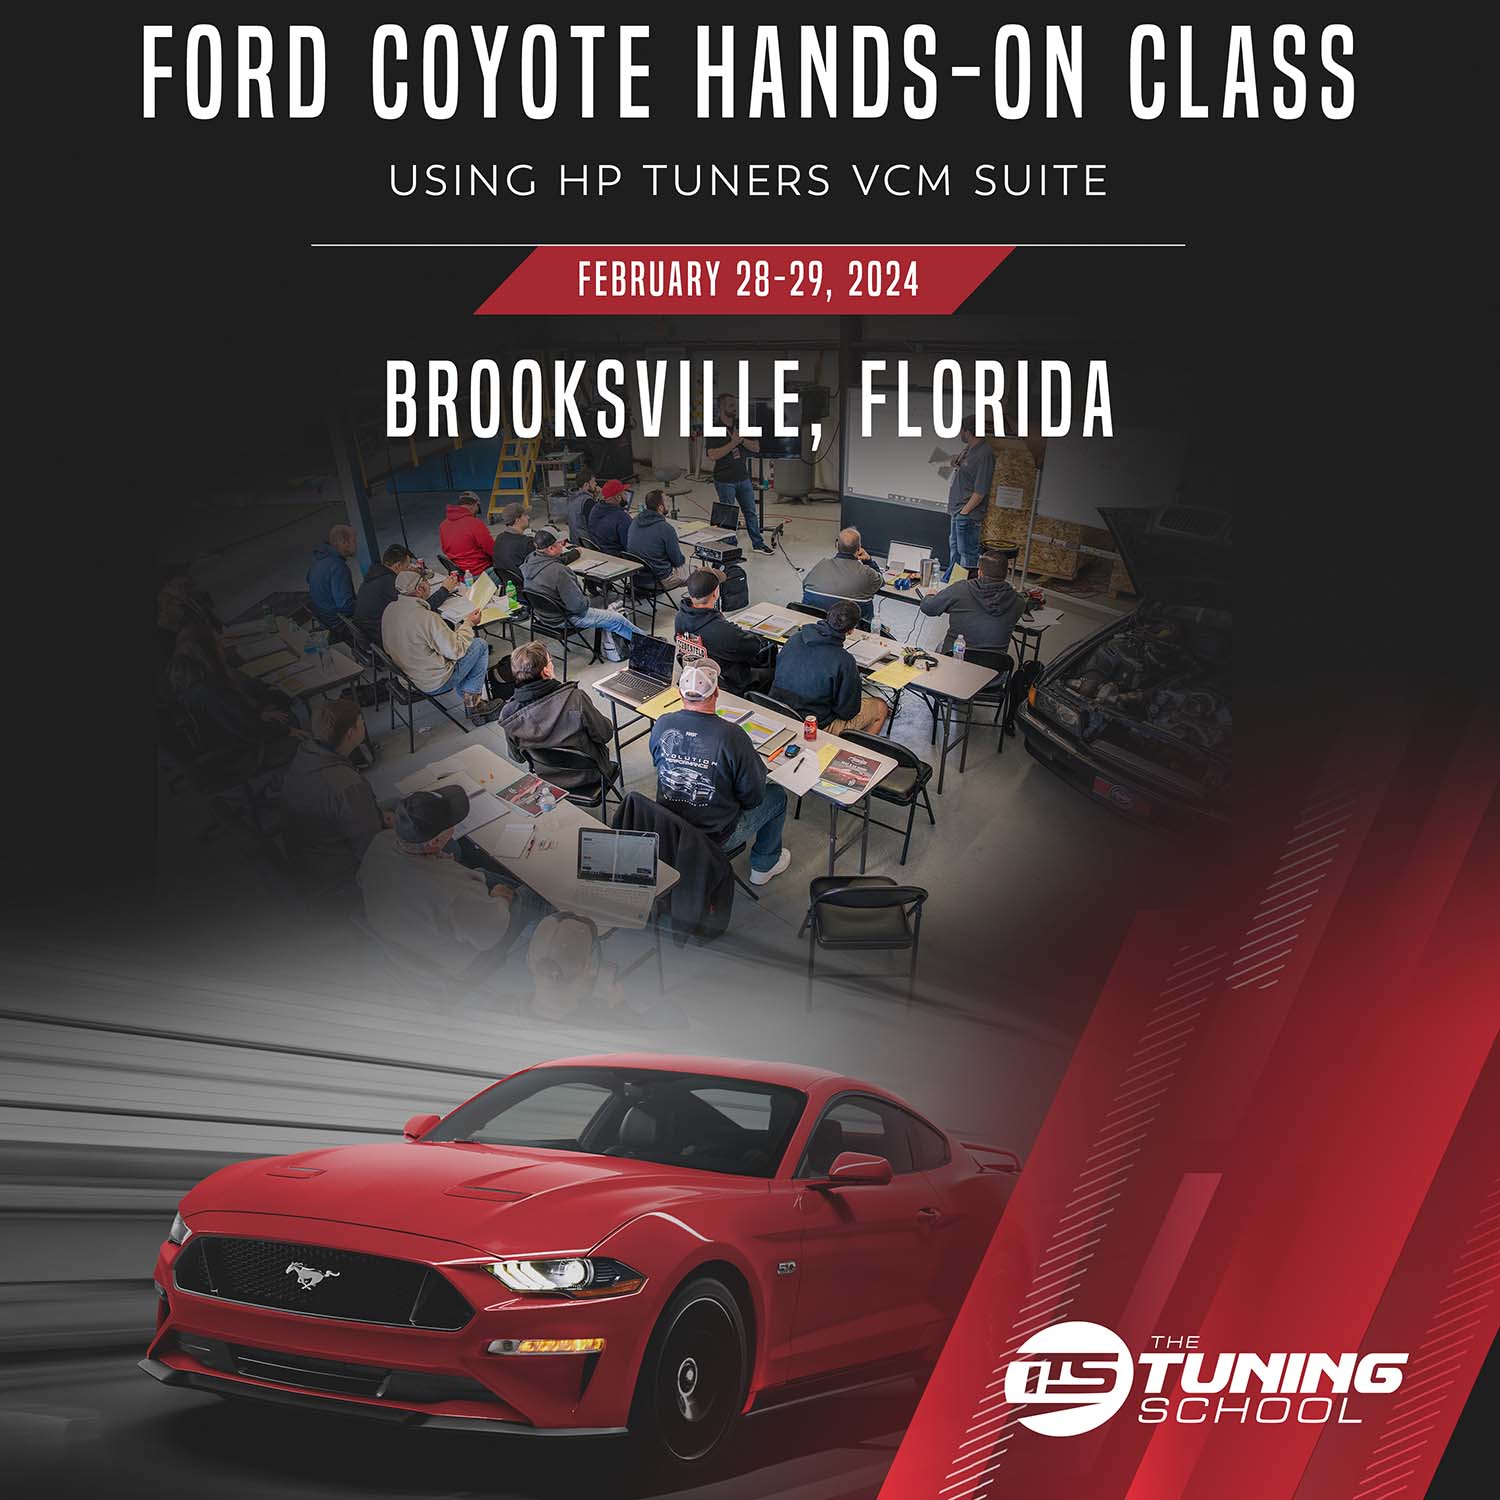 Ford Coyote Hands-On Class using HP Tuners - Brooksville, February 2024